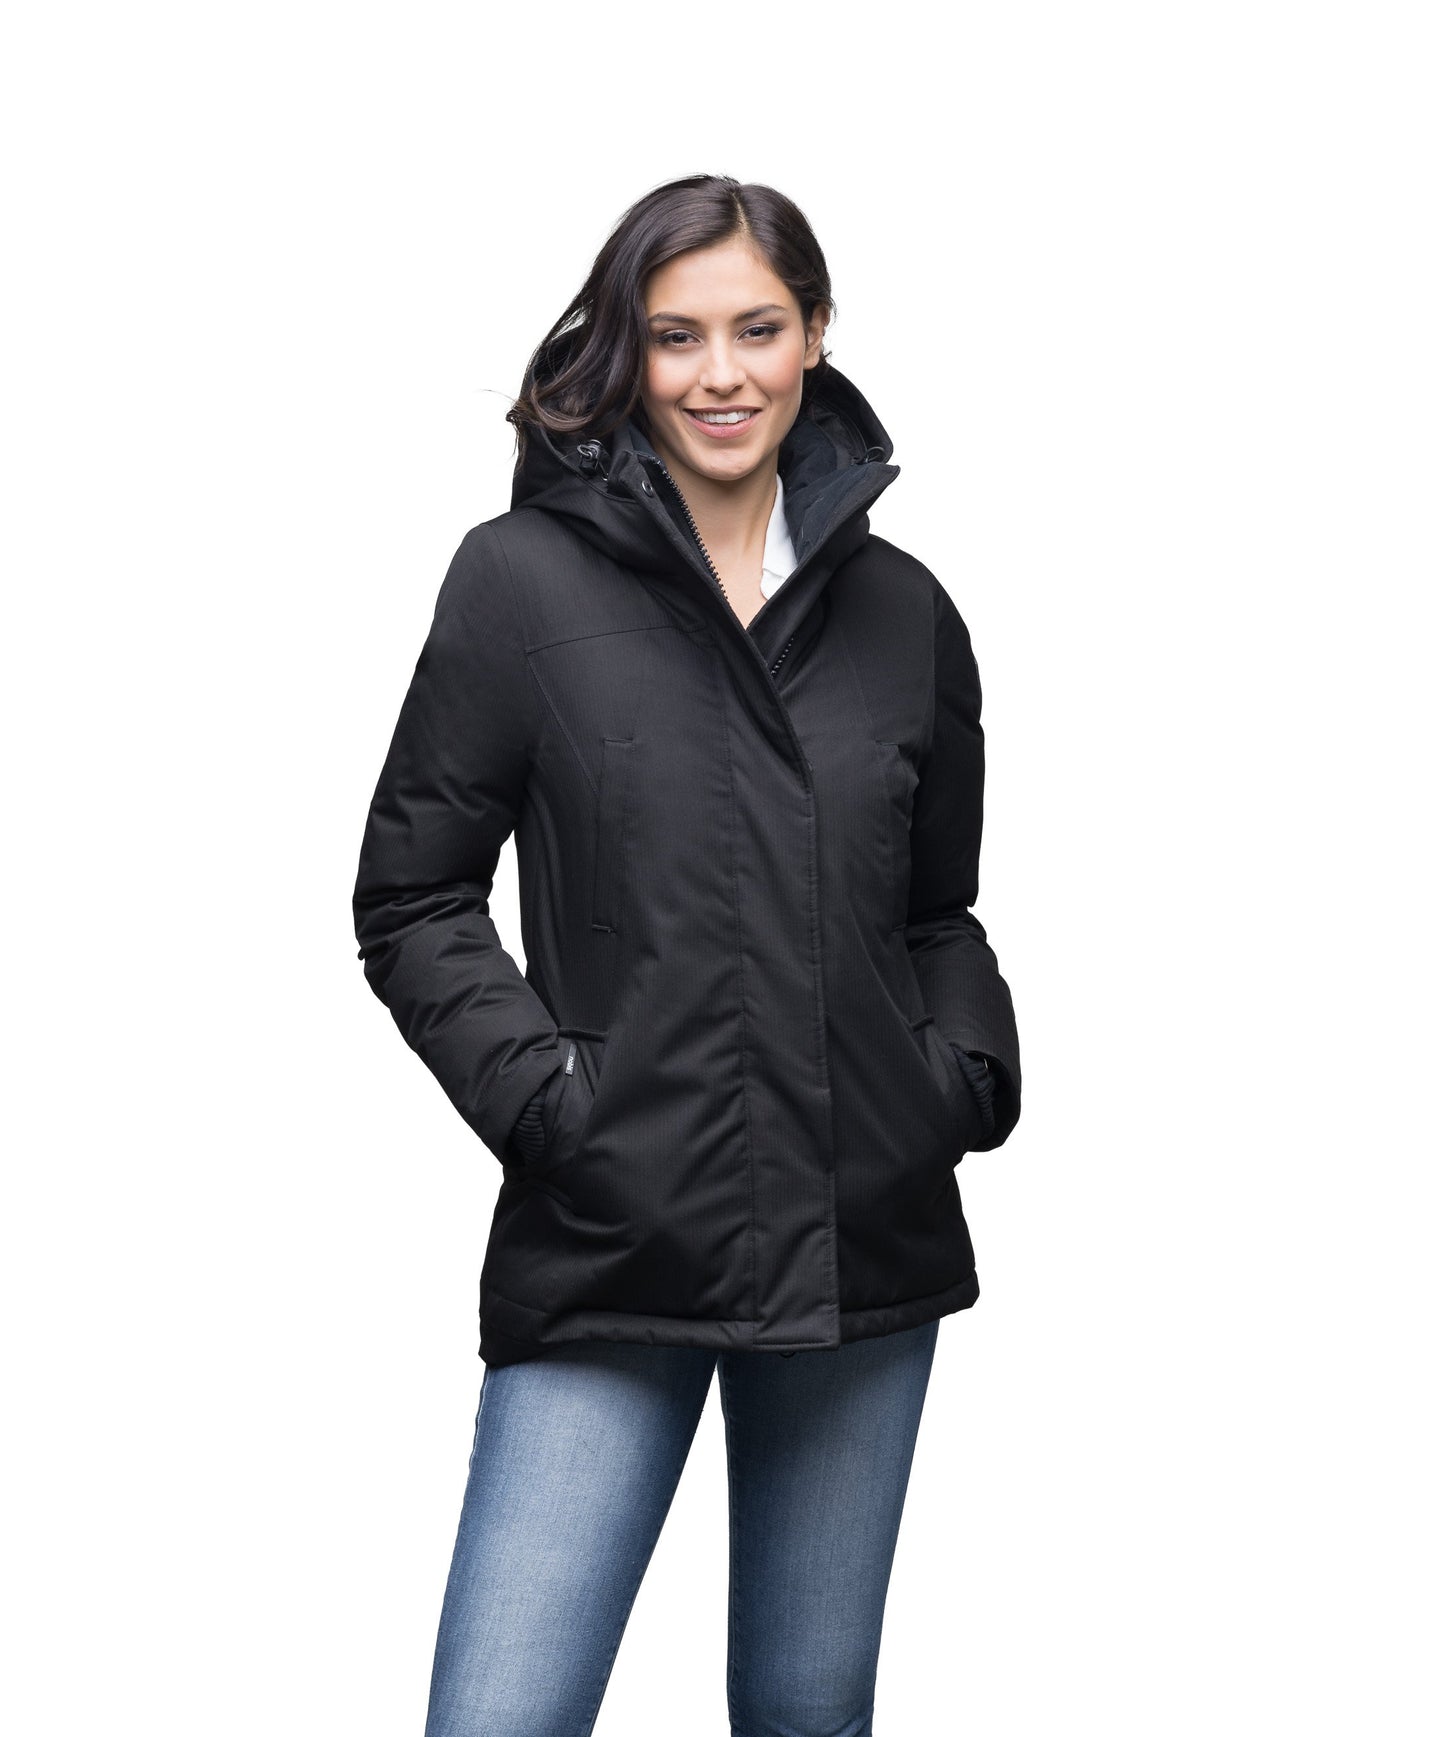 Women's hip length down filled parka in CH Black